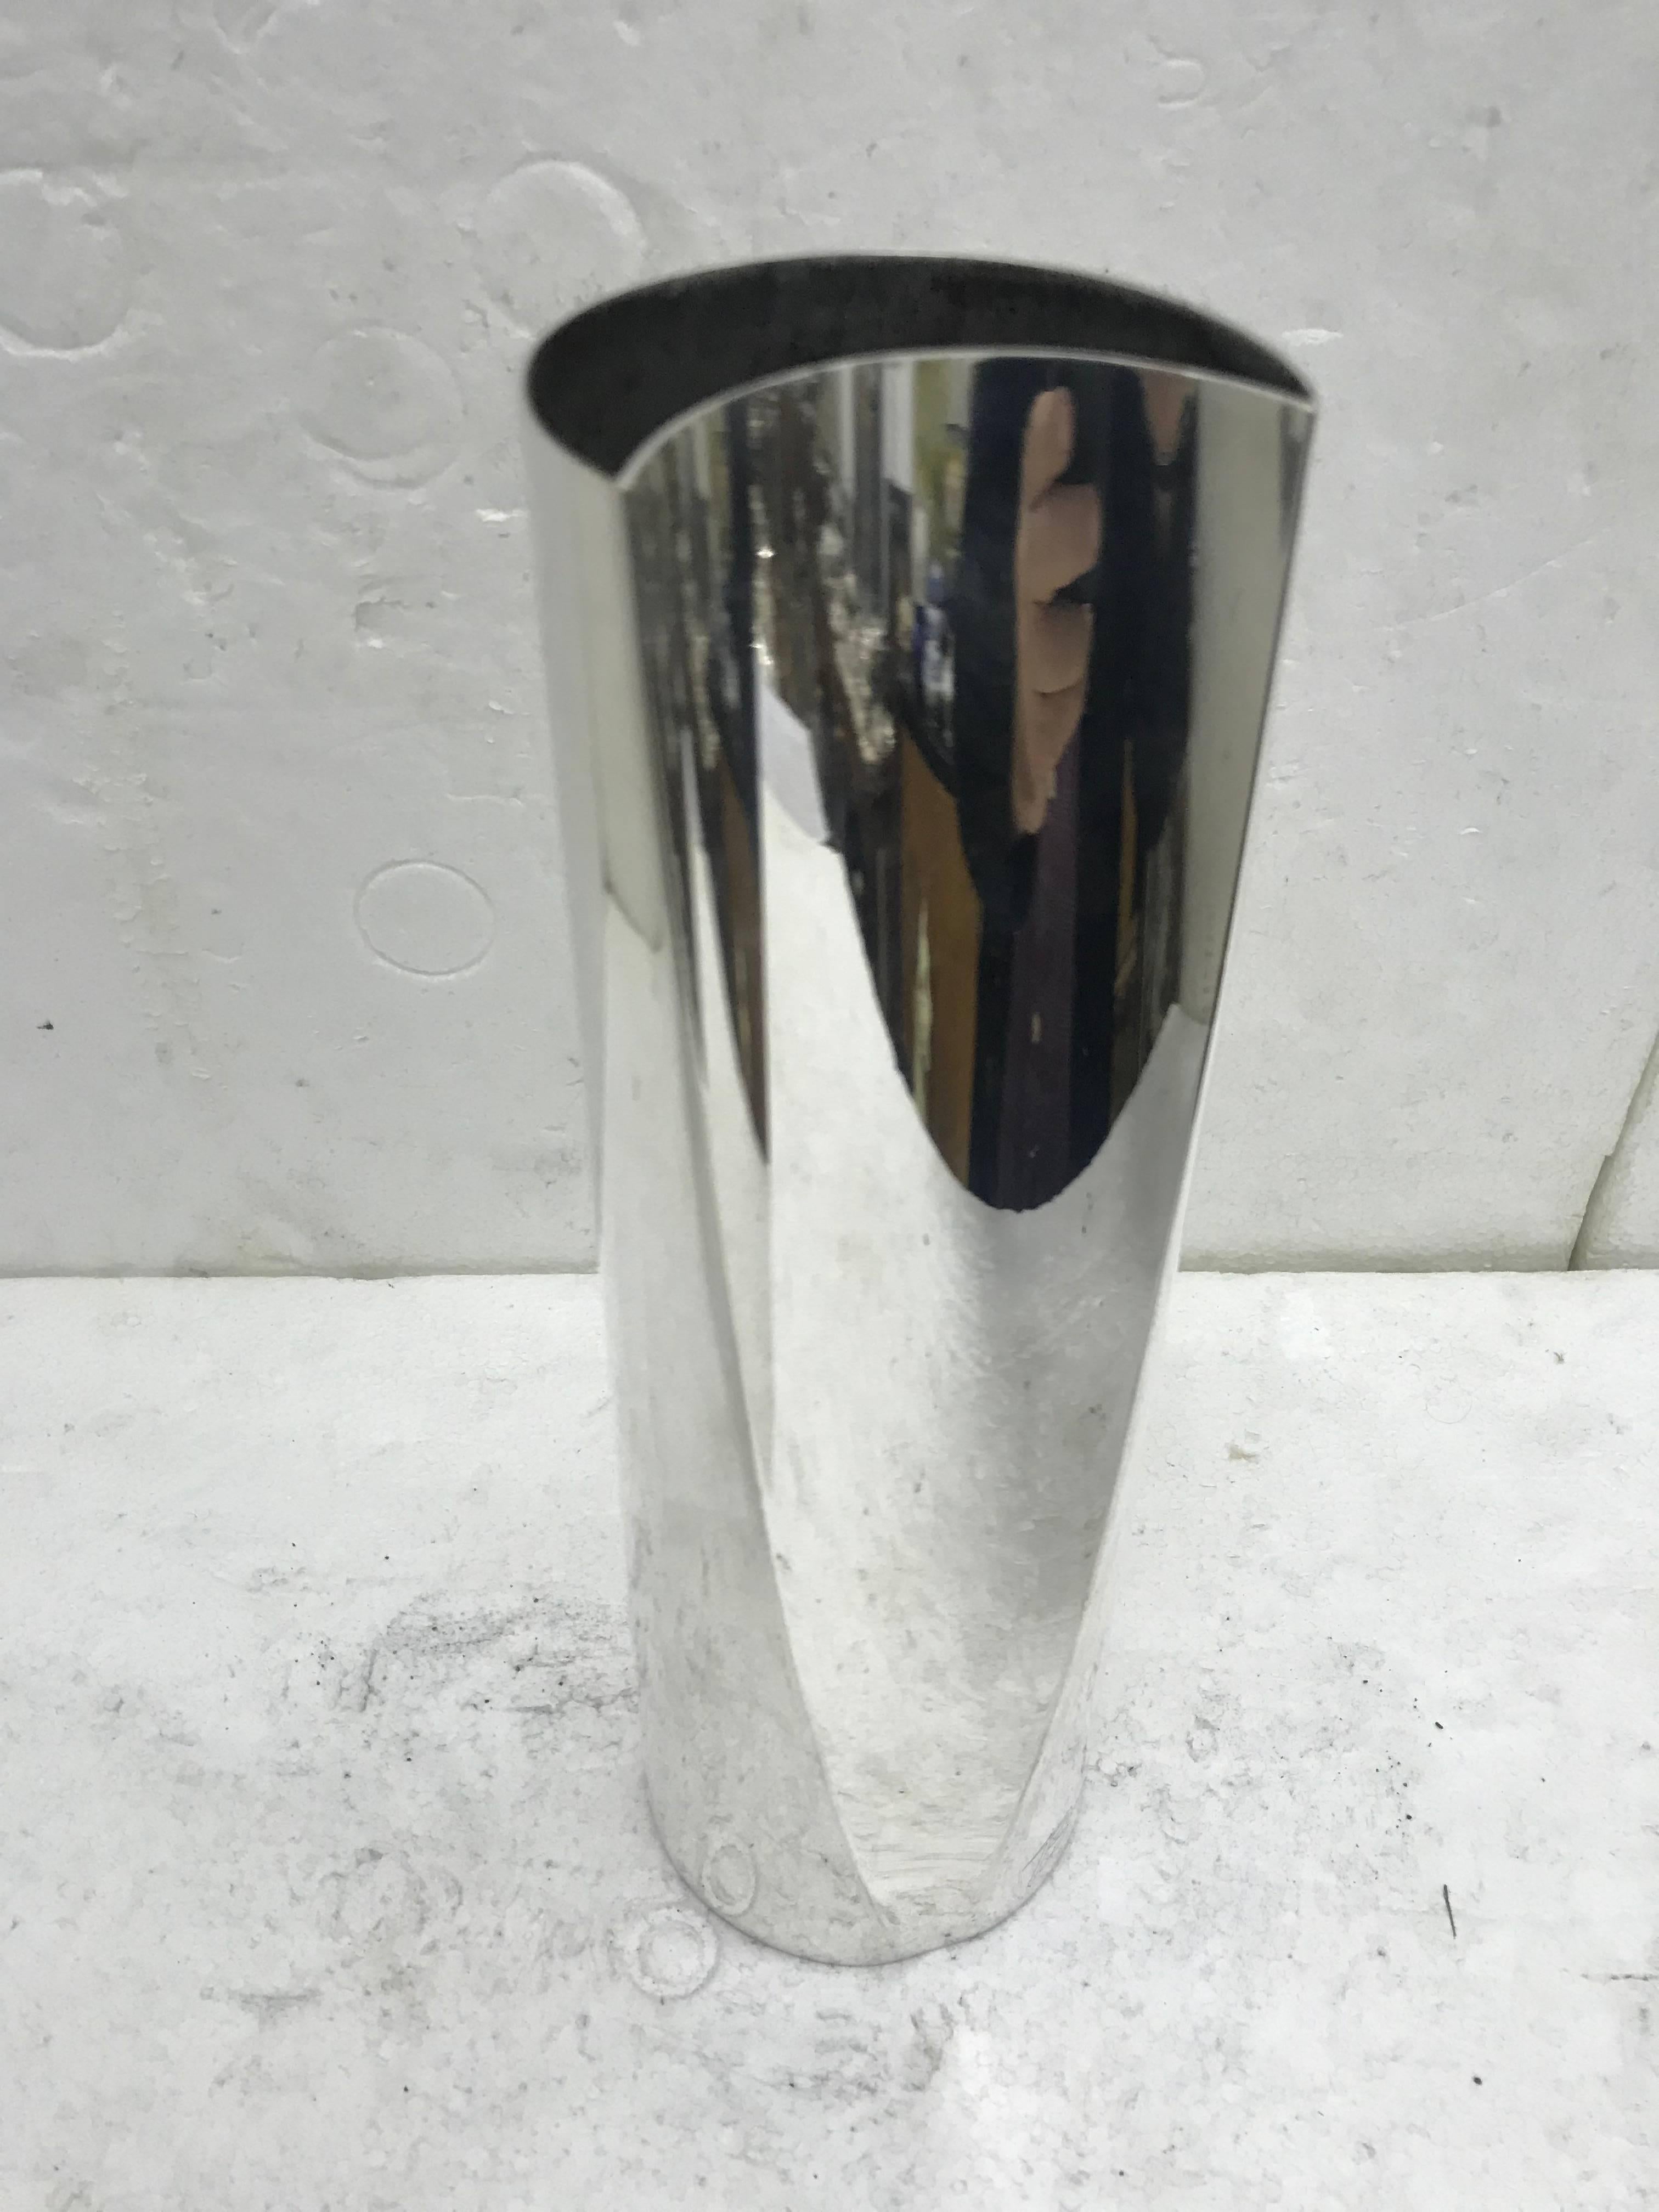 Elegant vase by Iconic Italian designer and metalsmith, Lino Sabattini. Silver plated vase Marked 'Sabattini' & 'Made in Italy' circa 1970. Also marked 'Baruffa' on the side, probably the shop who sold the item.